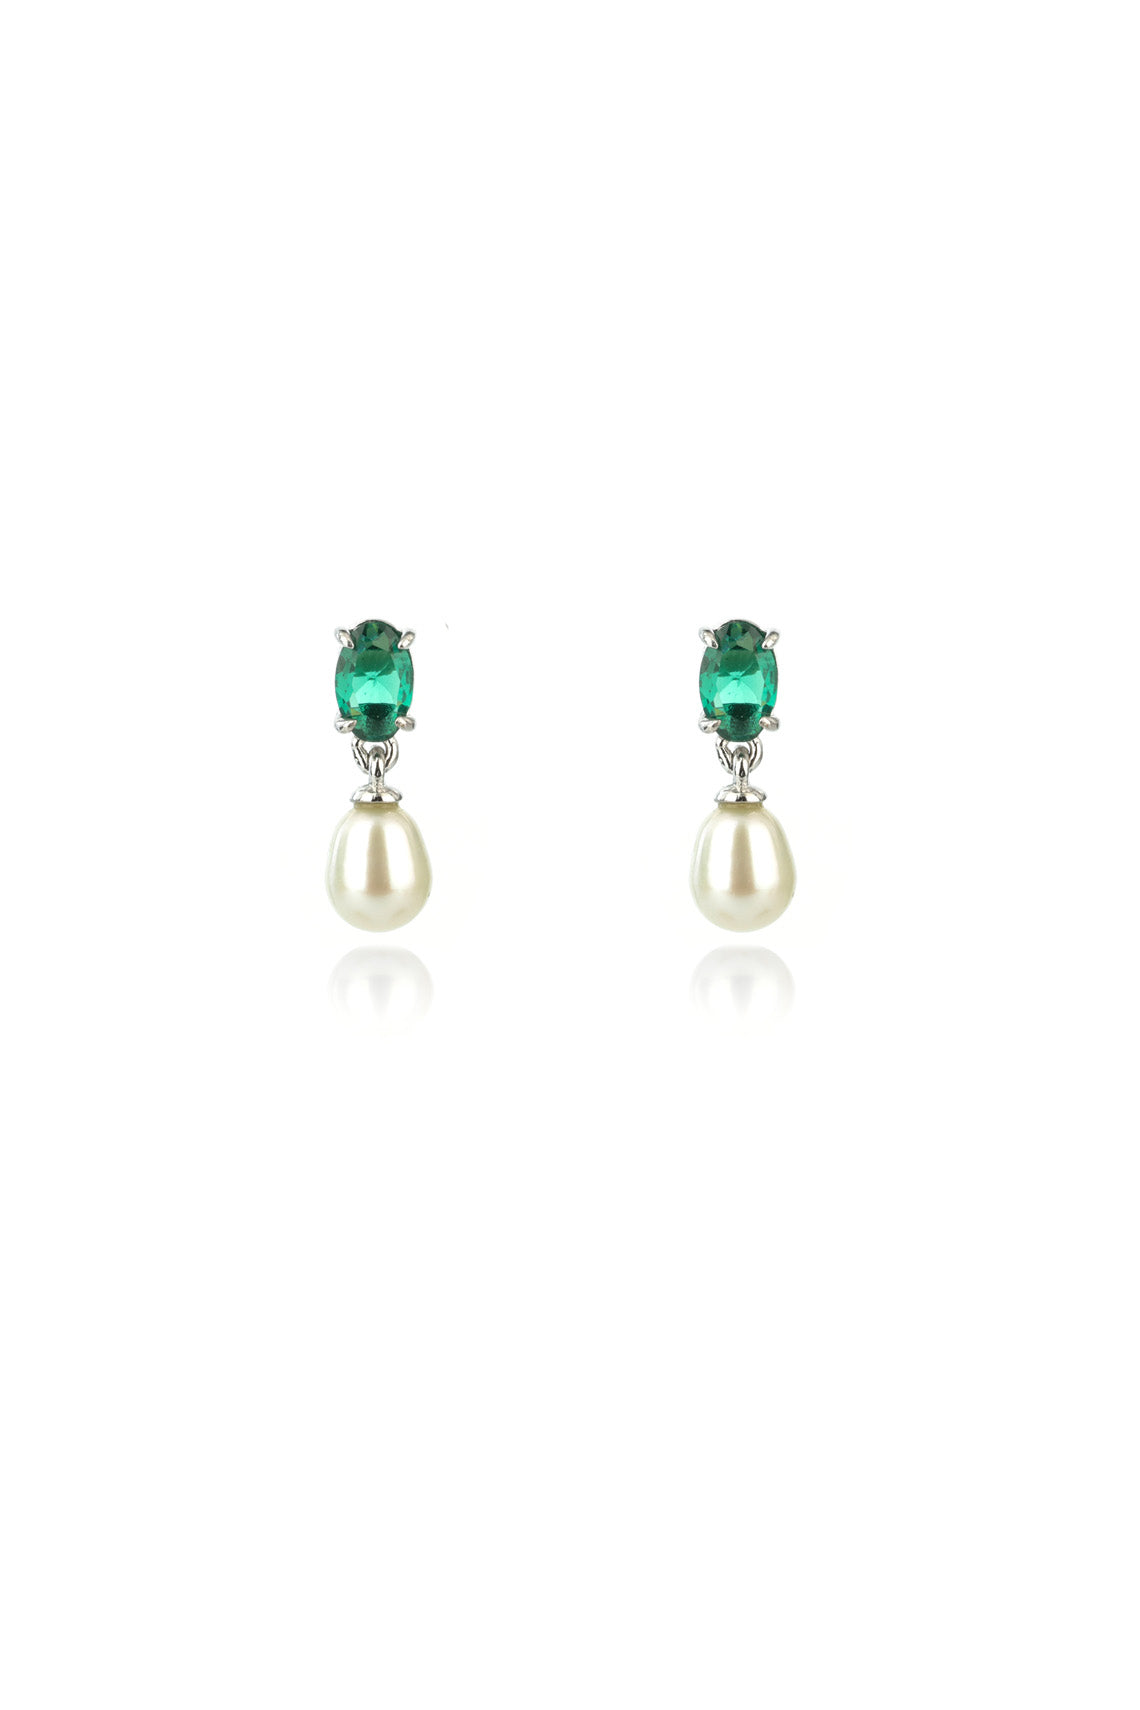 OCEANS WHITSUNDAY EARRINGS GREEN AND SILVER